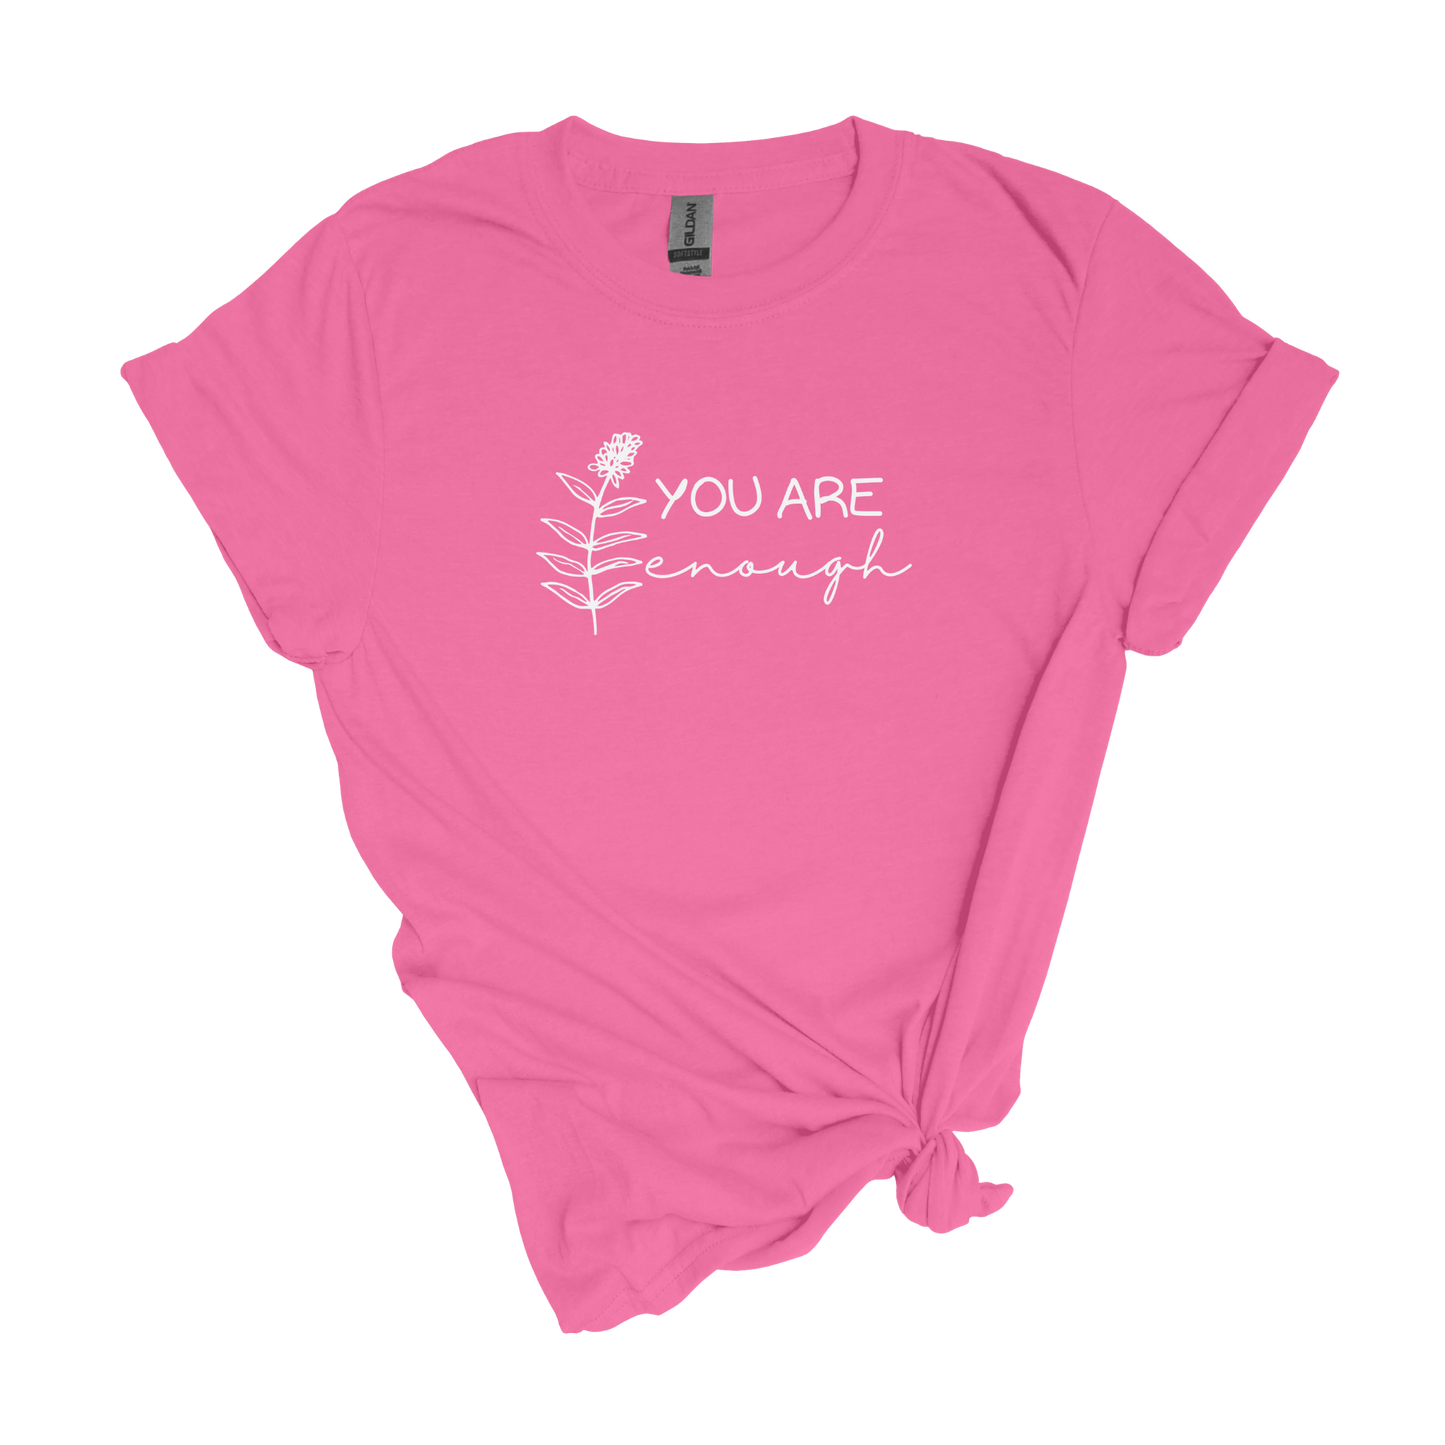 You are enough - Adult Unisex Soft Inspirational T-shirt